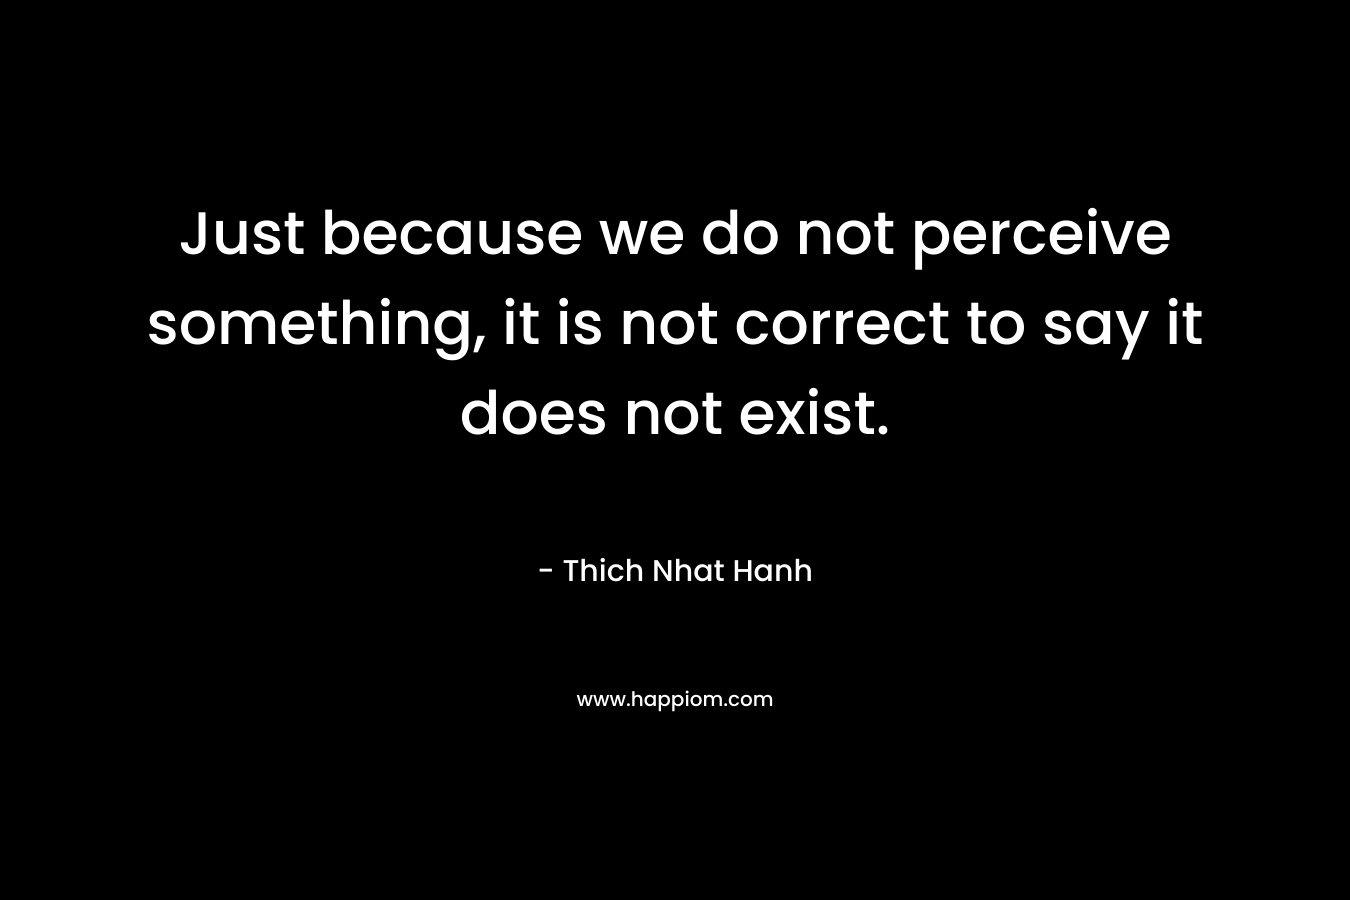 Just because we do not perceive something, it is not correct to say it does not exist.